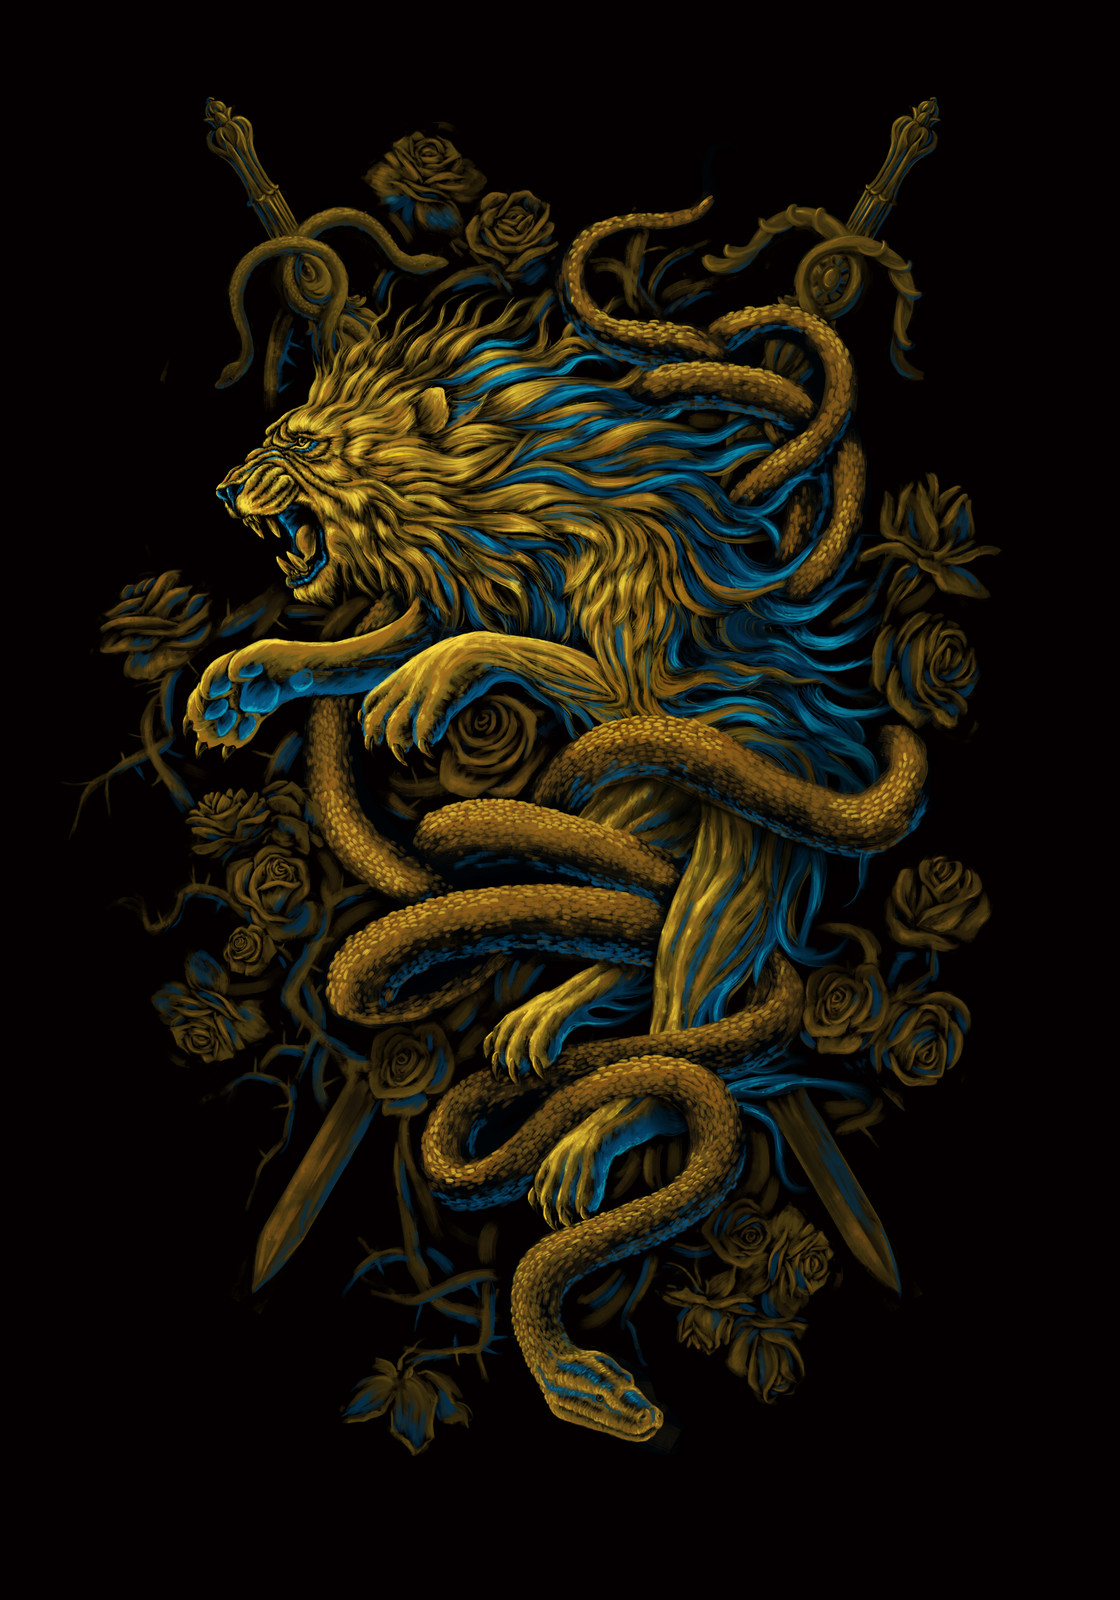 Flaviano Oliveira - THE LION & THE SNAKE